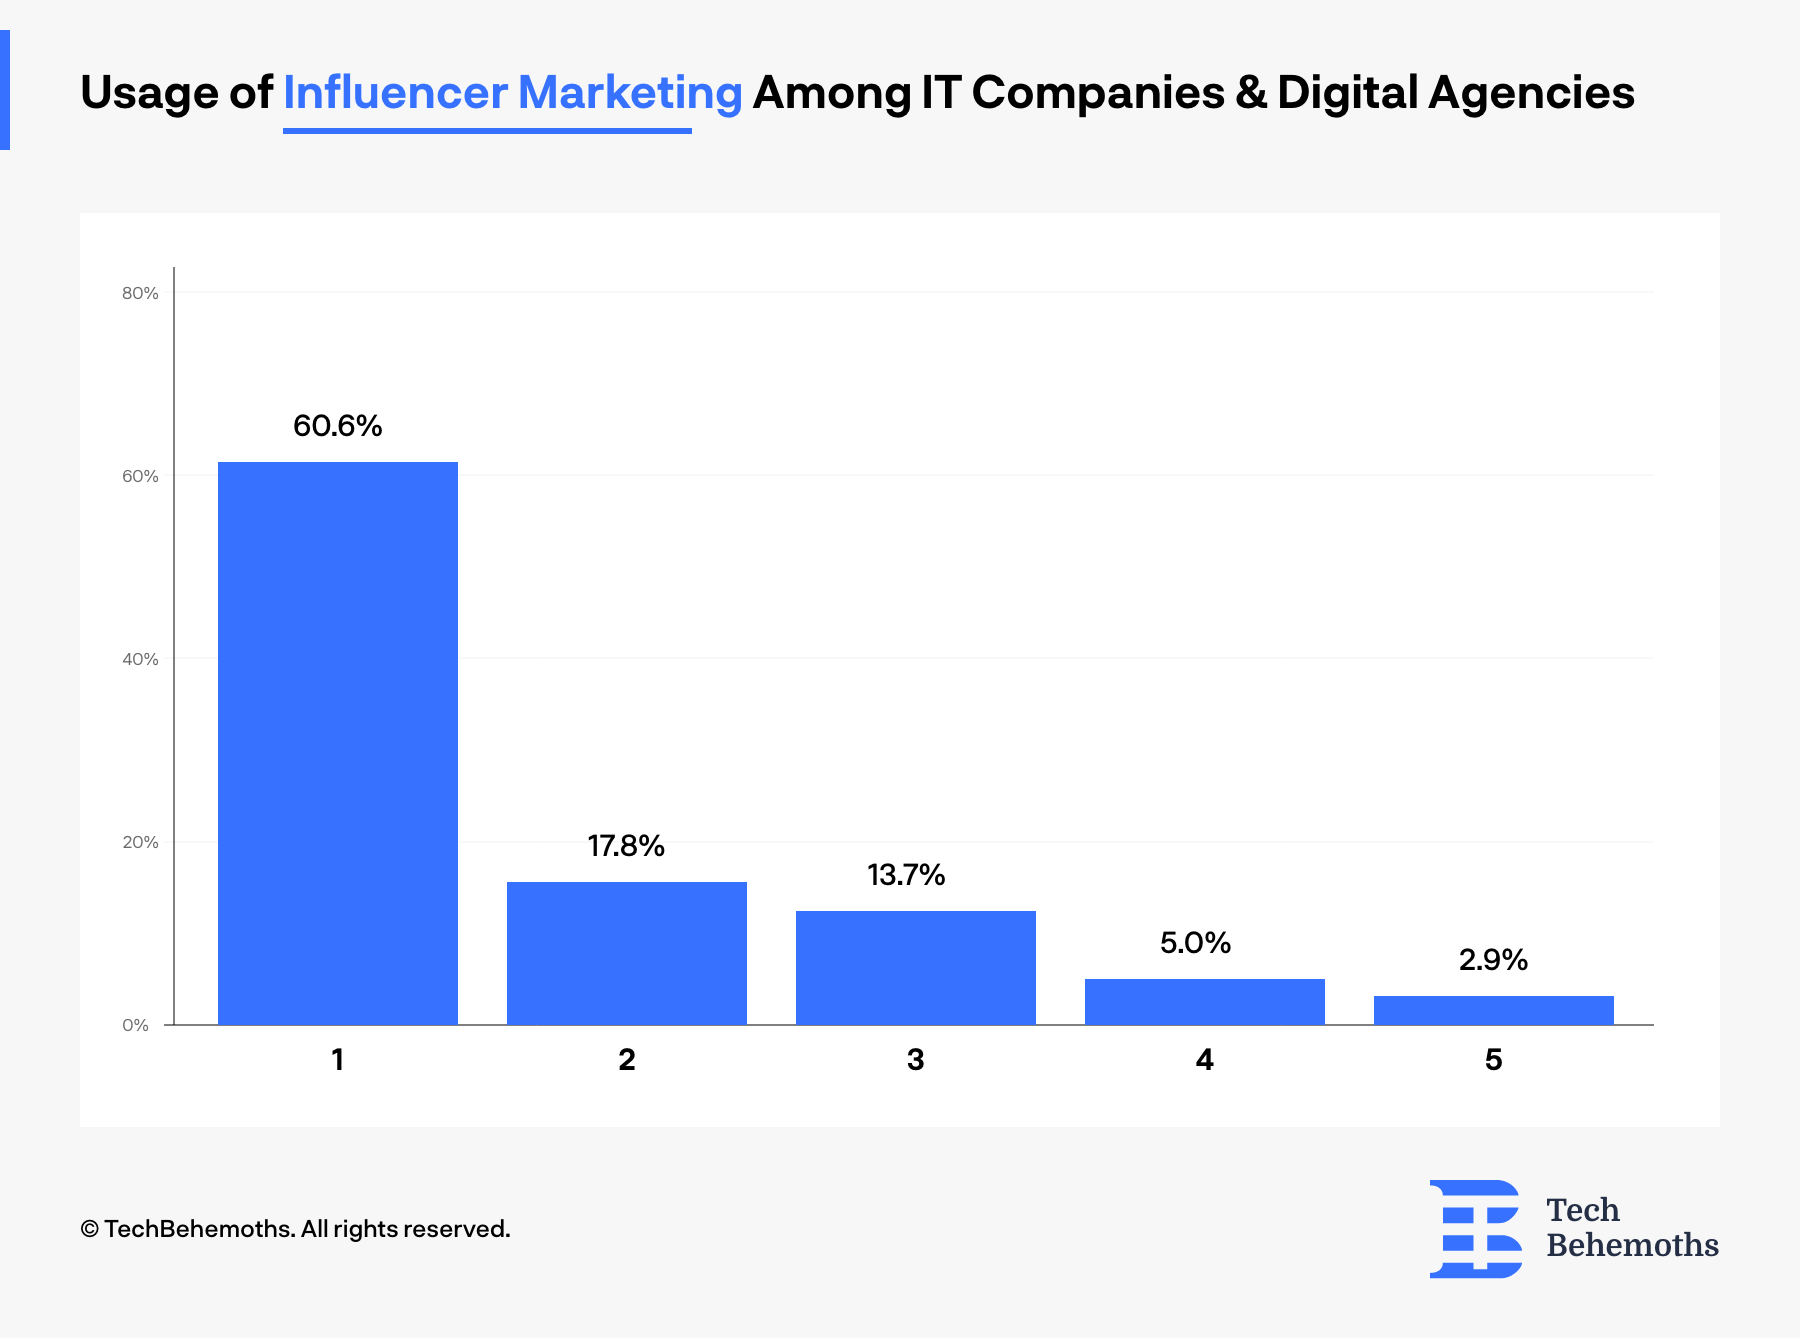 How often IT companies and digital agencies use influencer marketing for self-advertising. Survey results